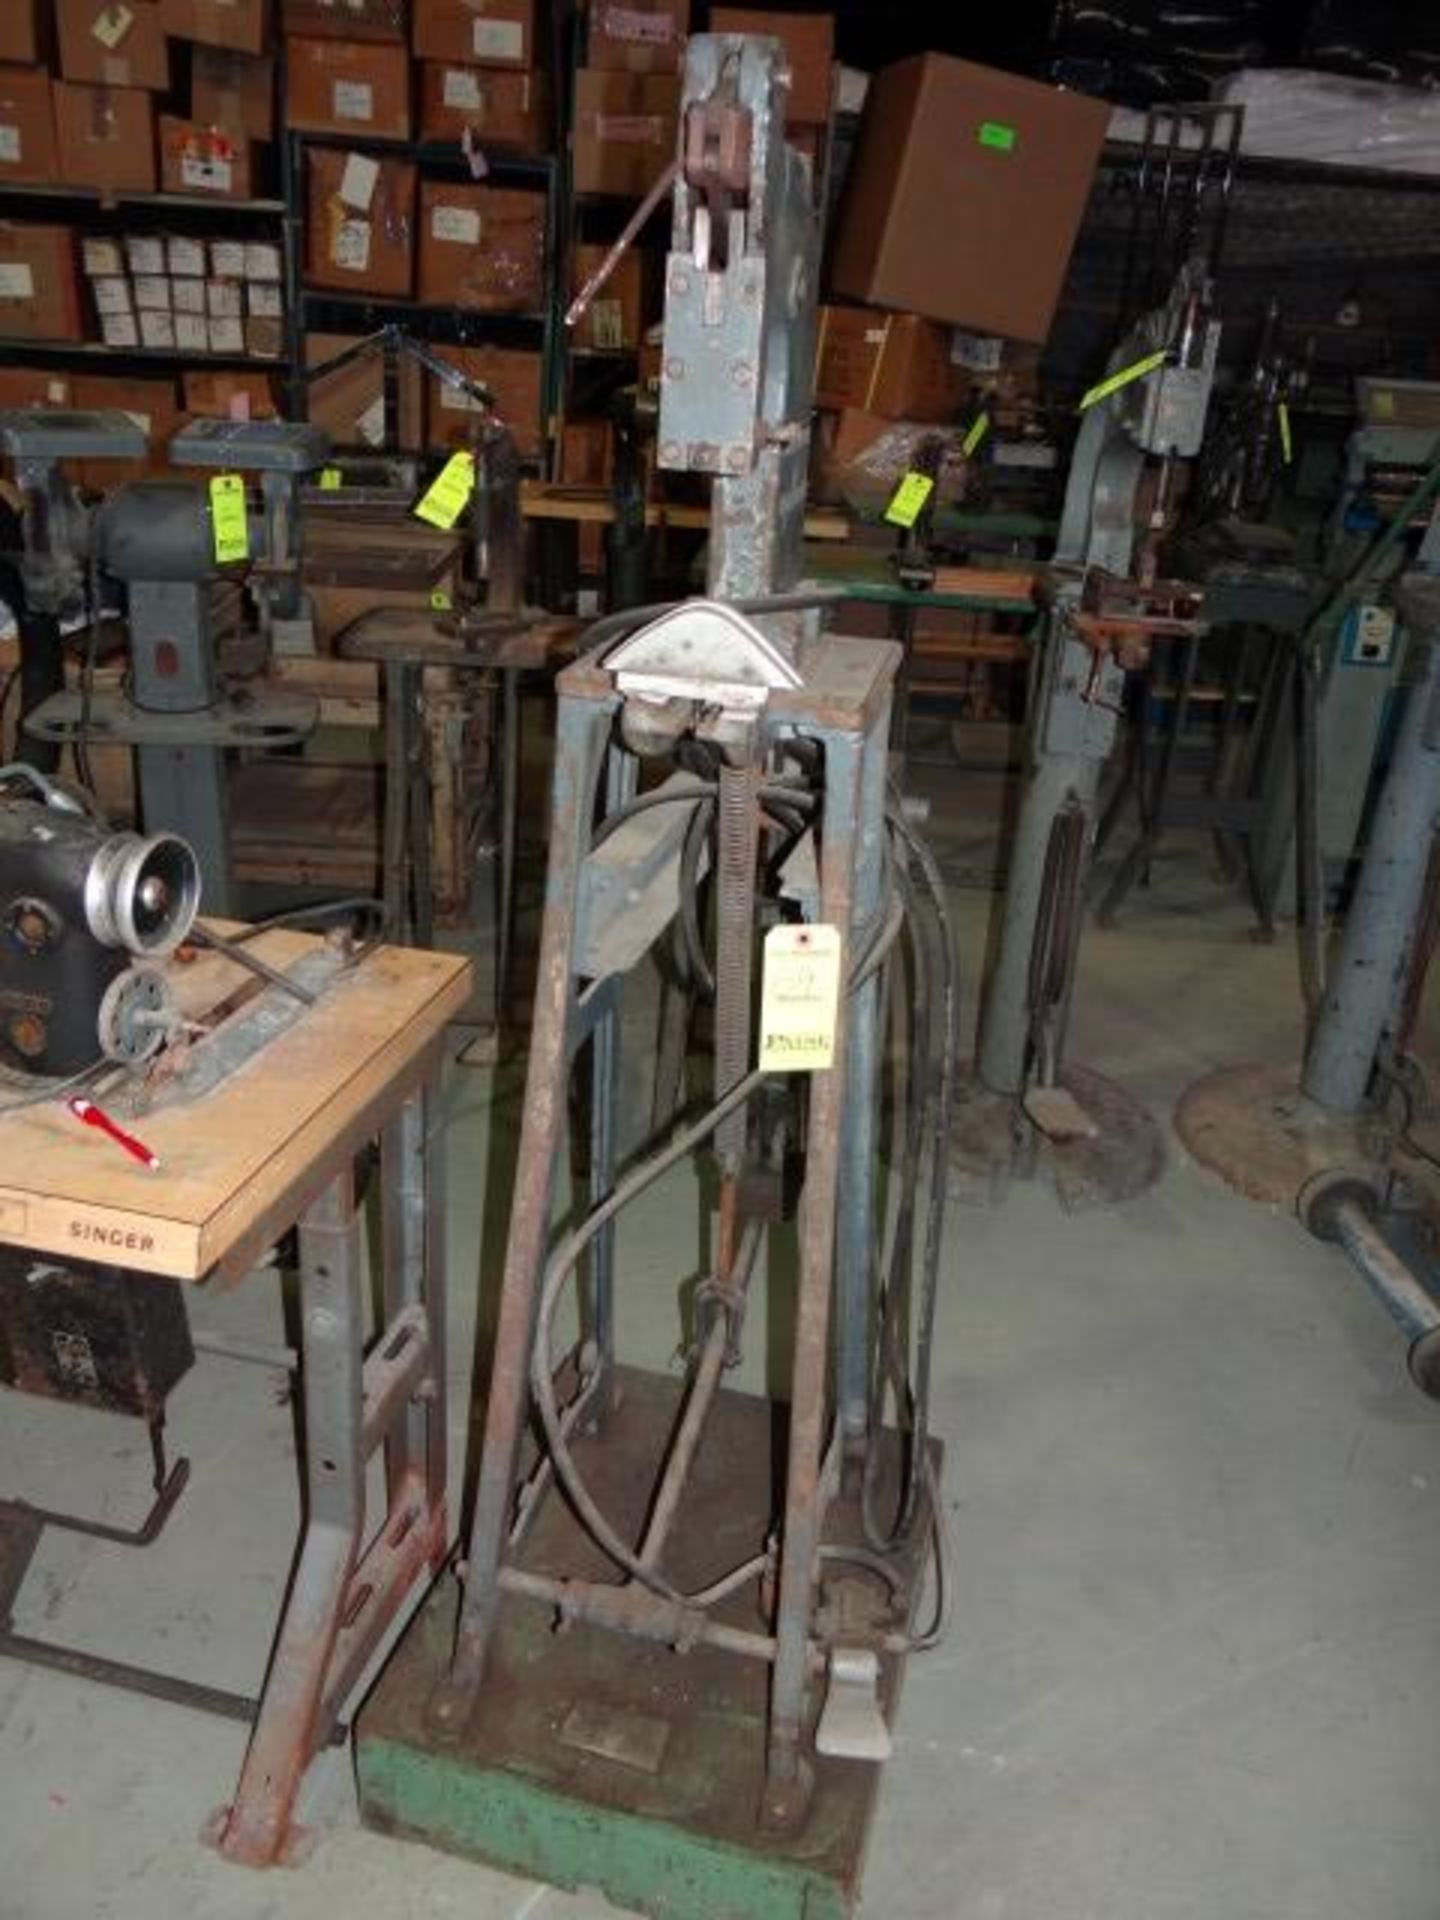 M M Balsam Electric Automatic Press for Bending Metal or Setting Rivets or Snaps